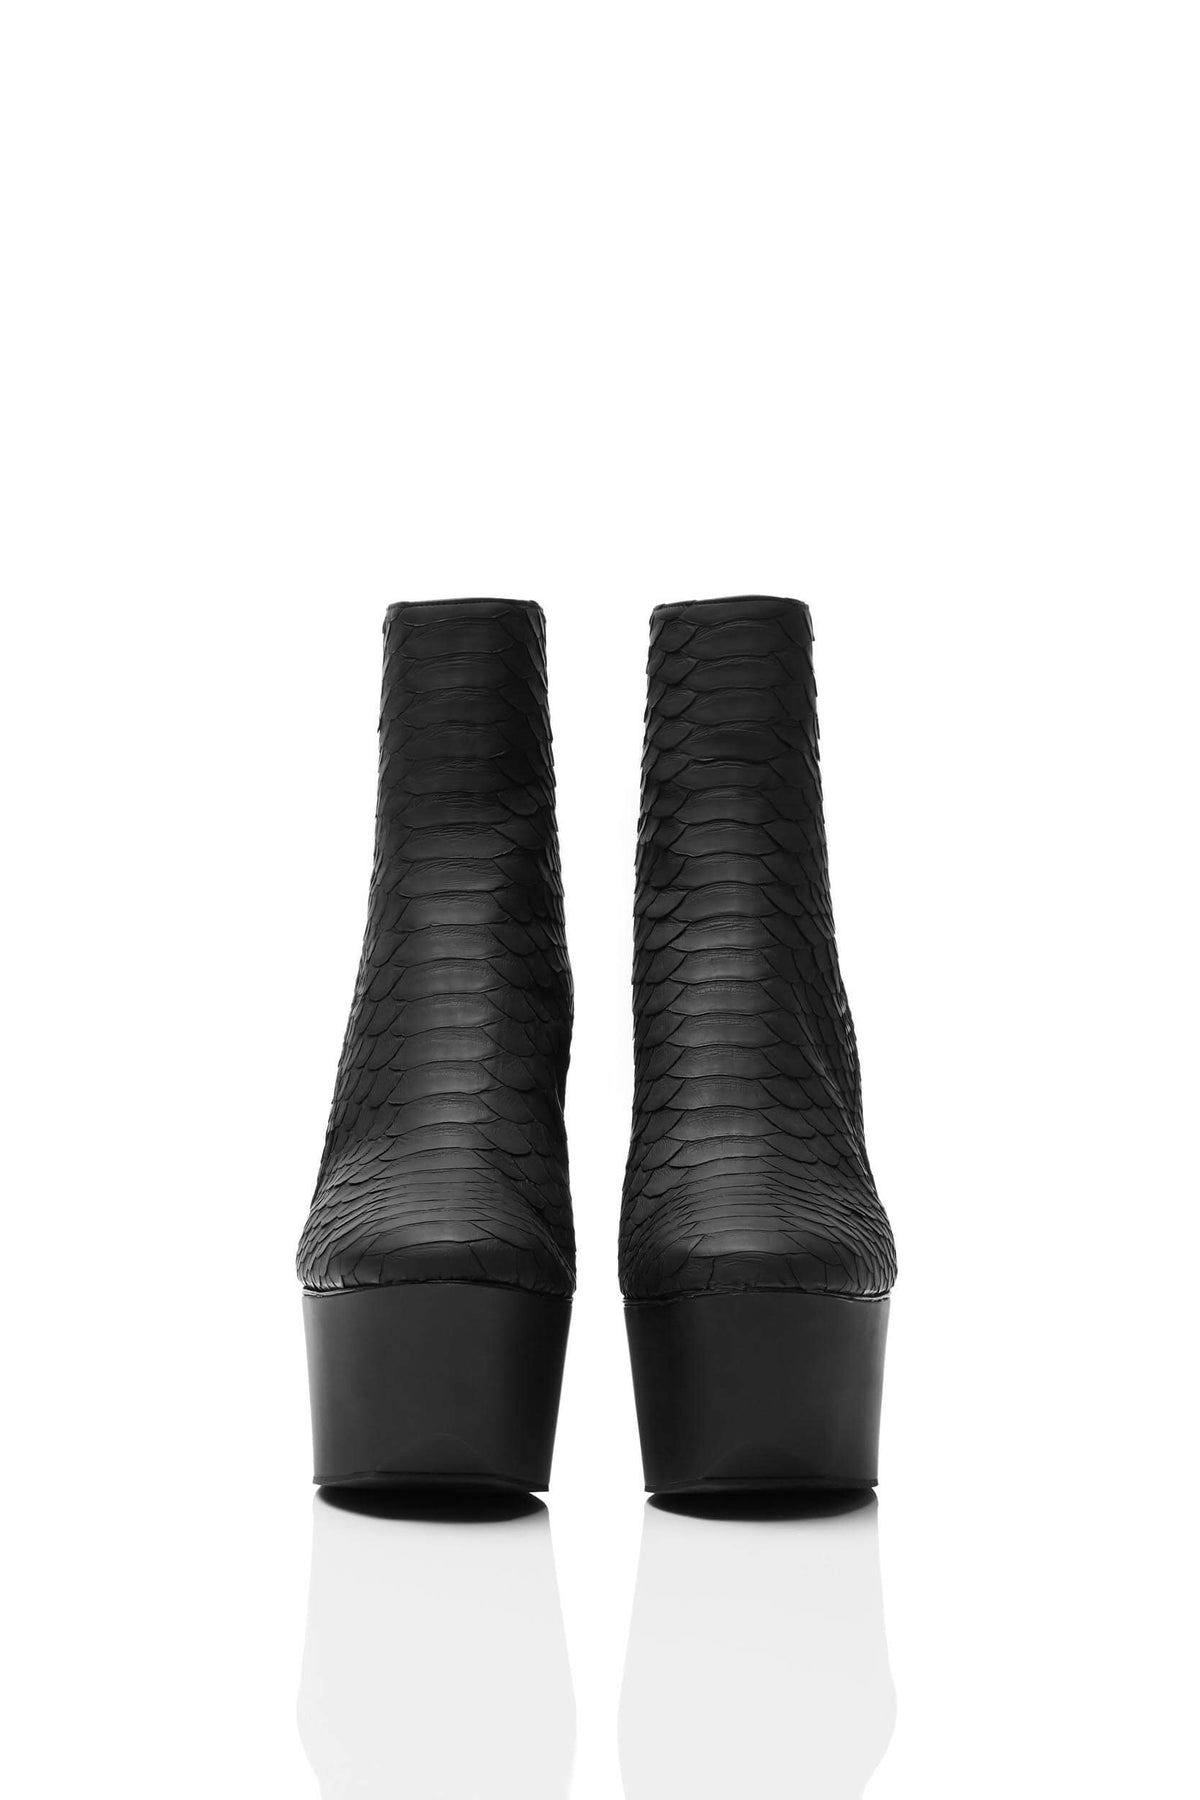 HAIKI 651 – Back zip platform boot with softly rounded toe. Finished in coated Genuine Python in black. 